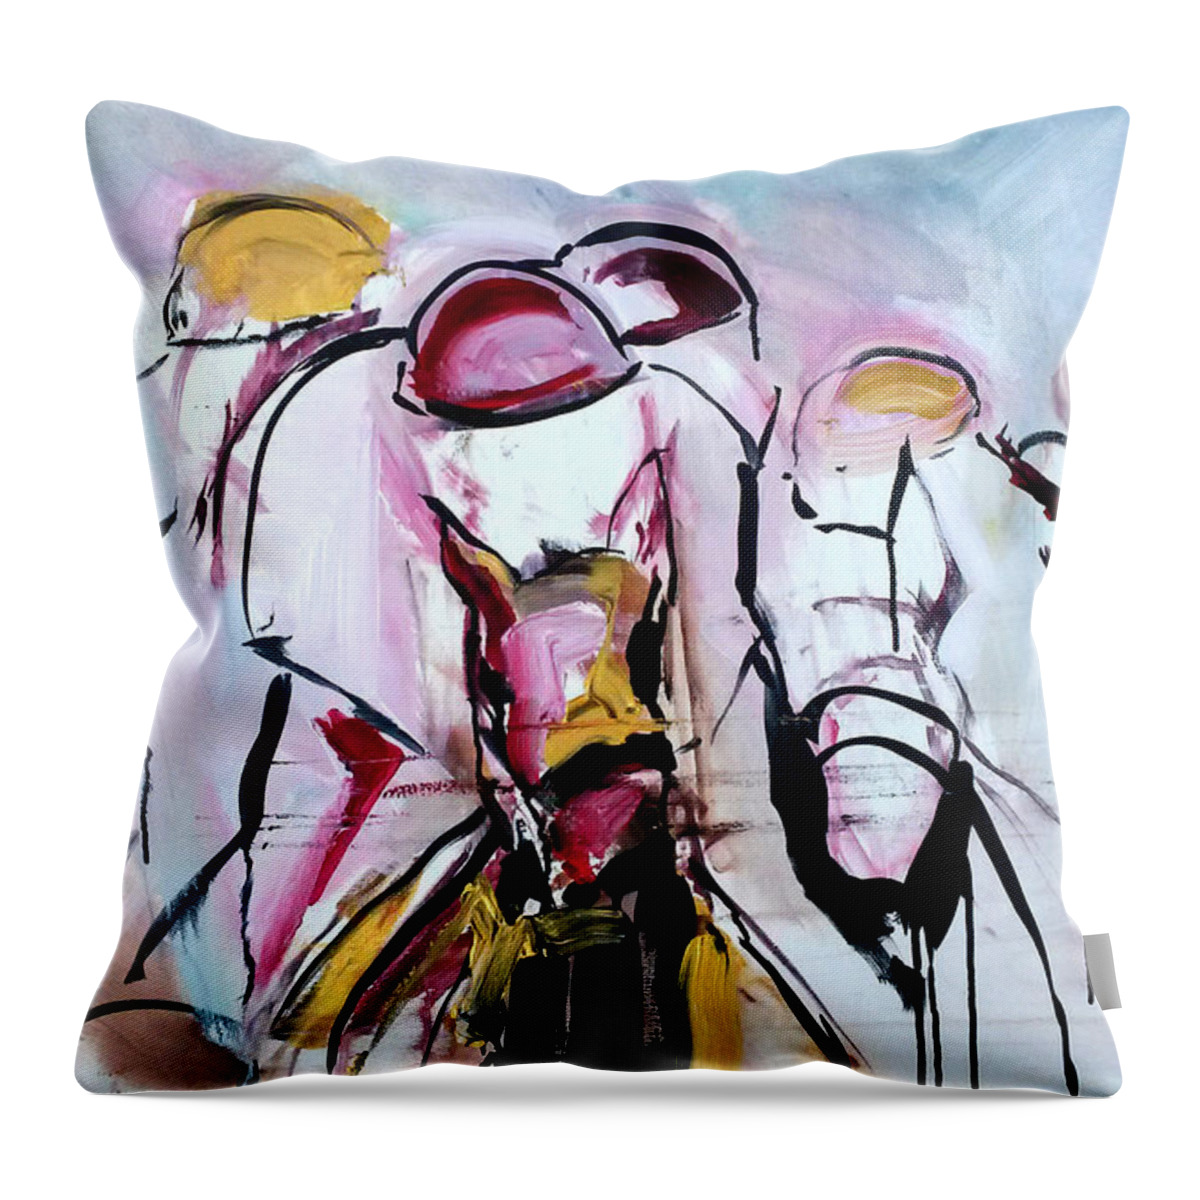  Throw Pillow featuring the painting Gold Sold by John Gholson